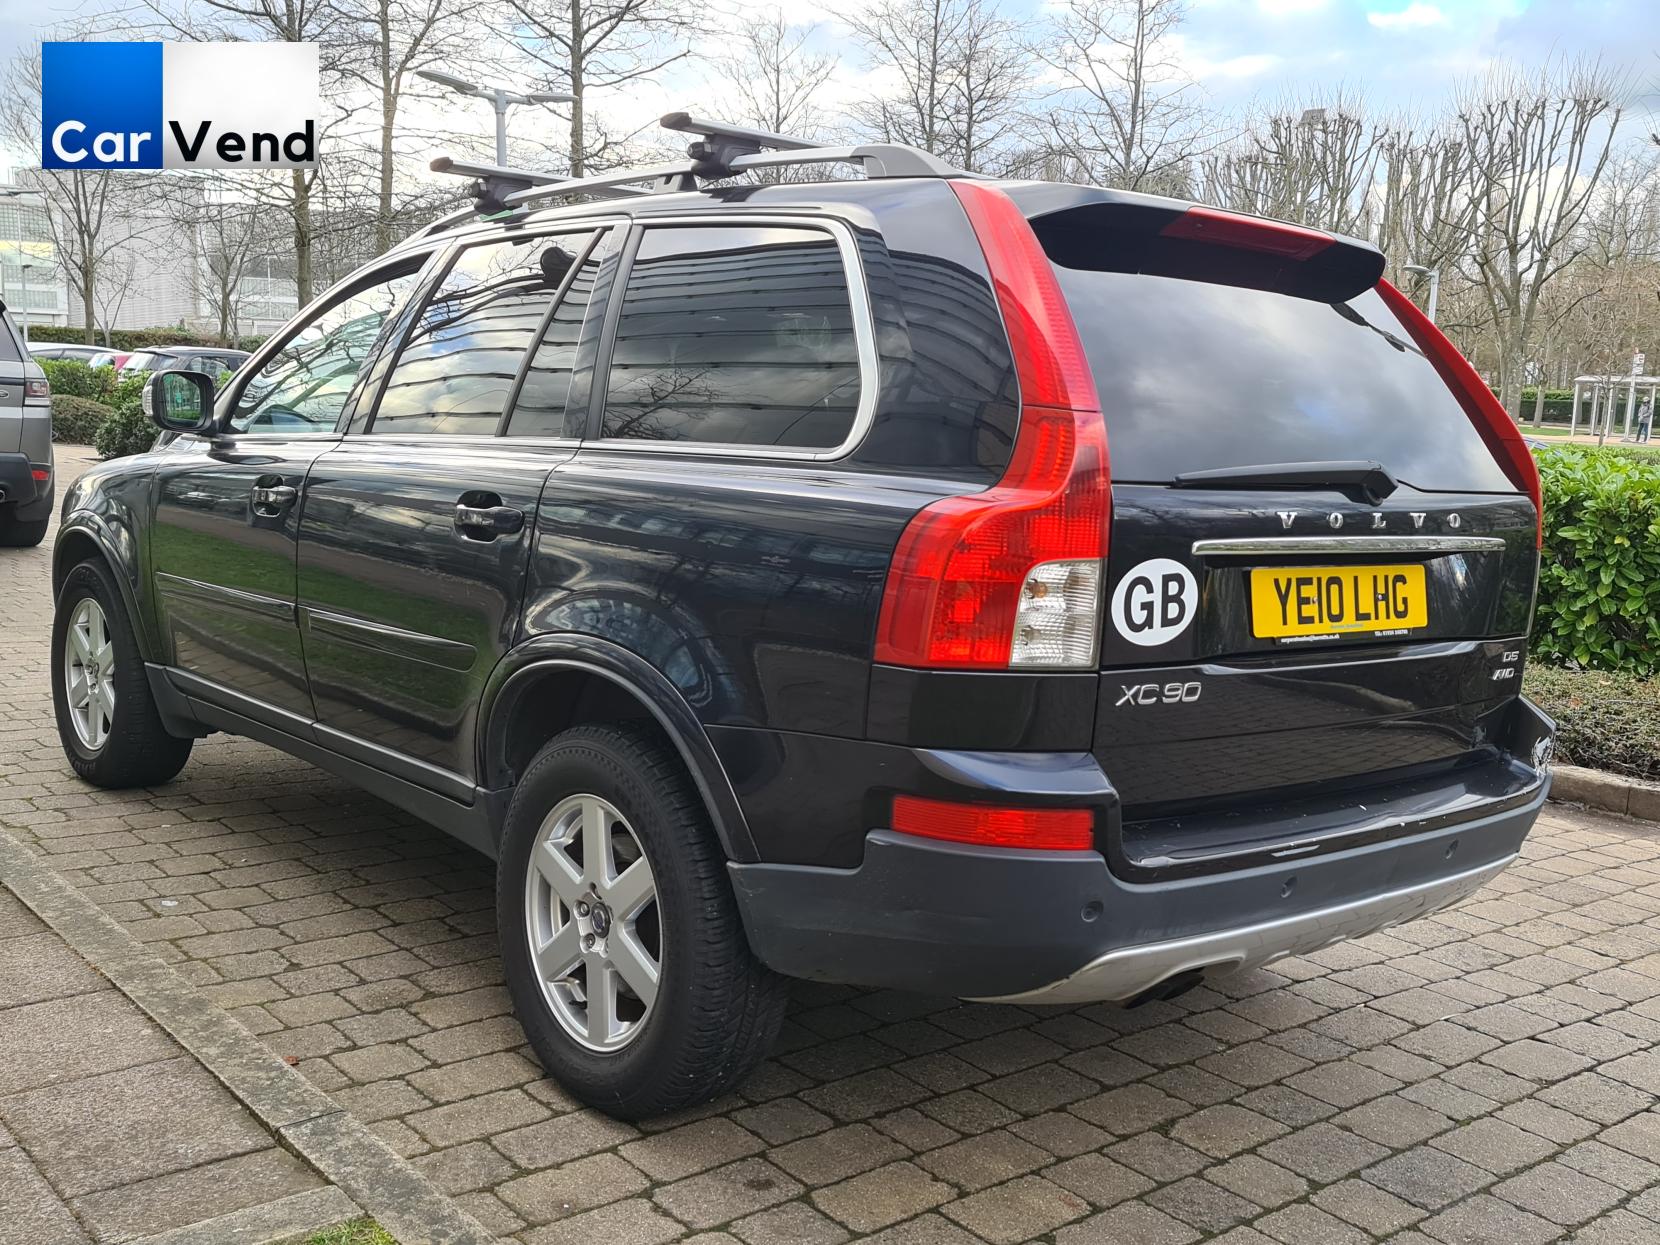 Volvo XC90 2.4 D5 Active SUV 5dr Diesel Geartronic AWD (224 g/km, 182 bhp)